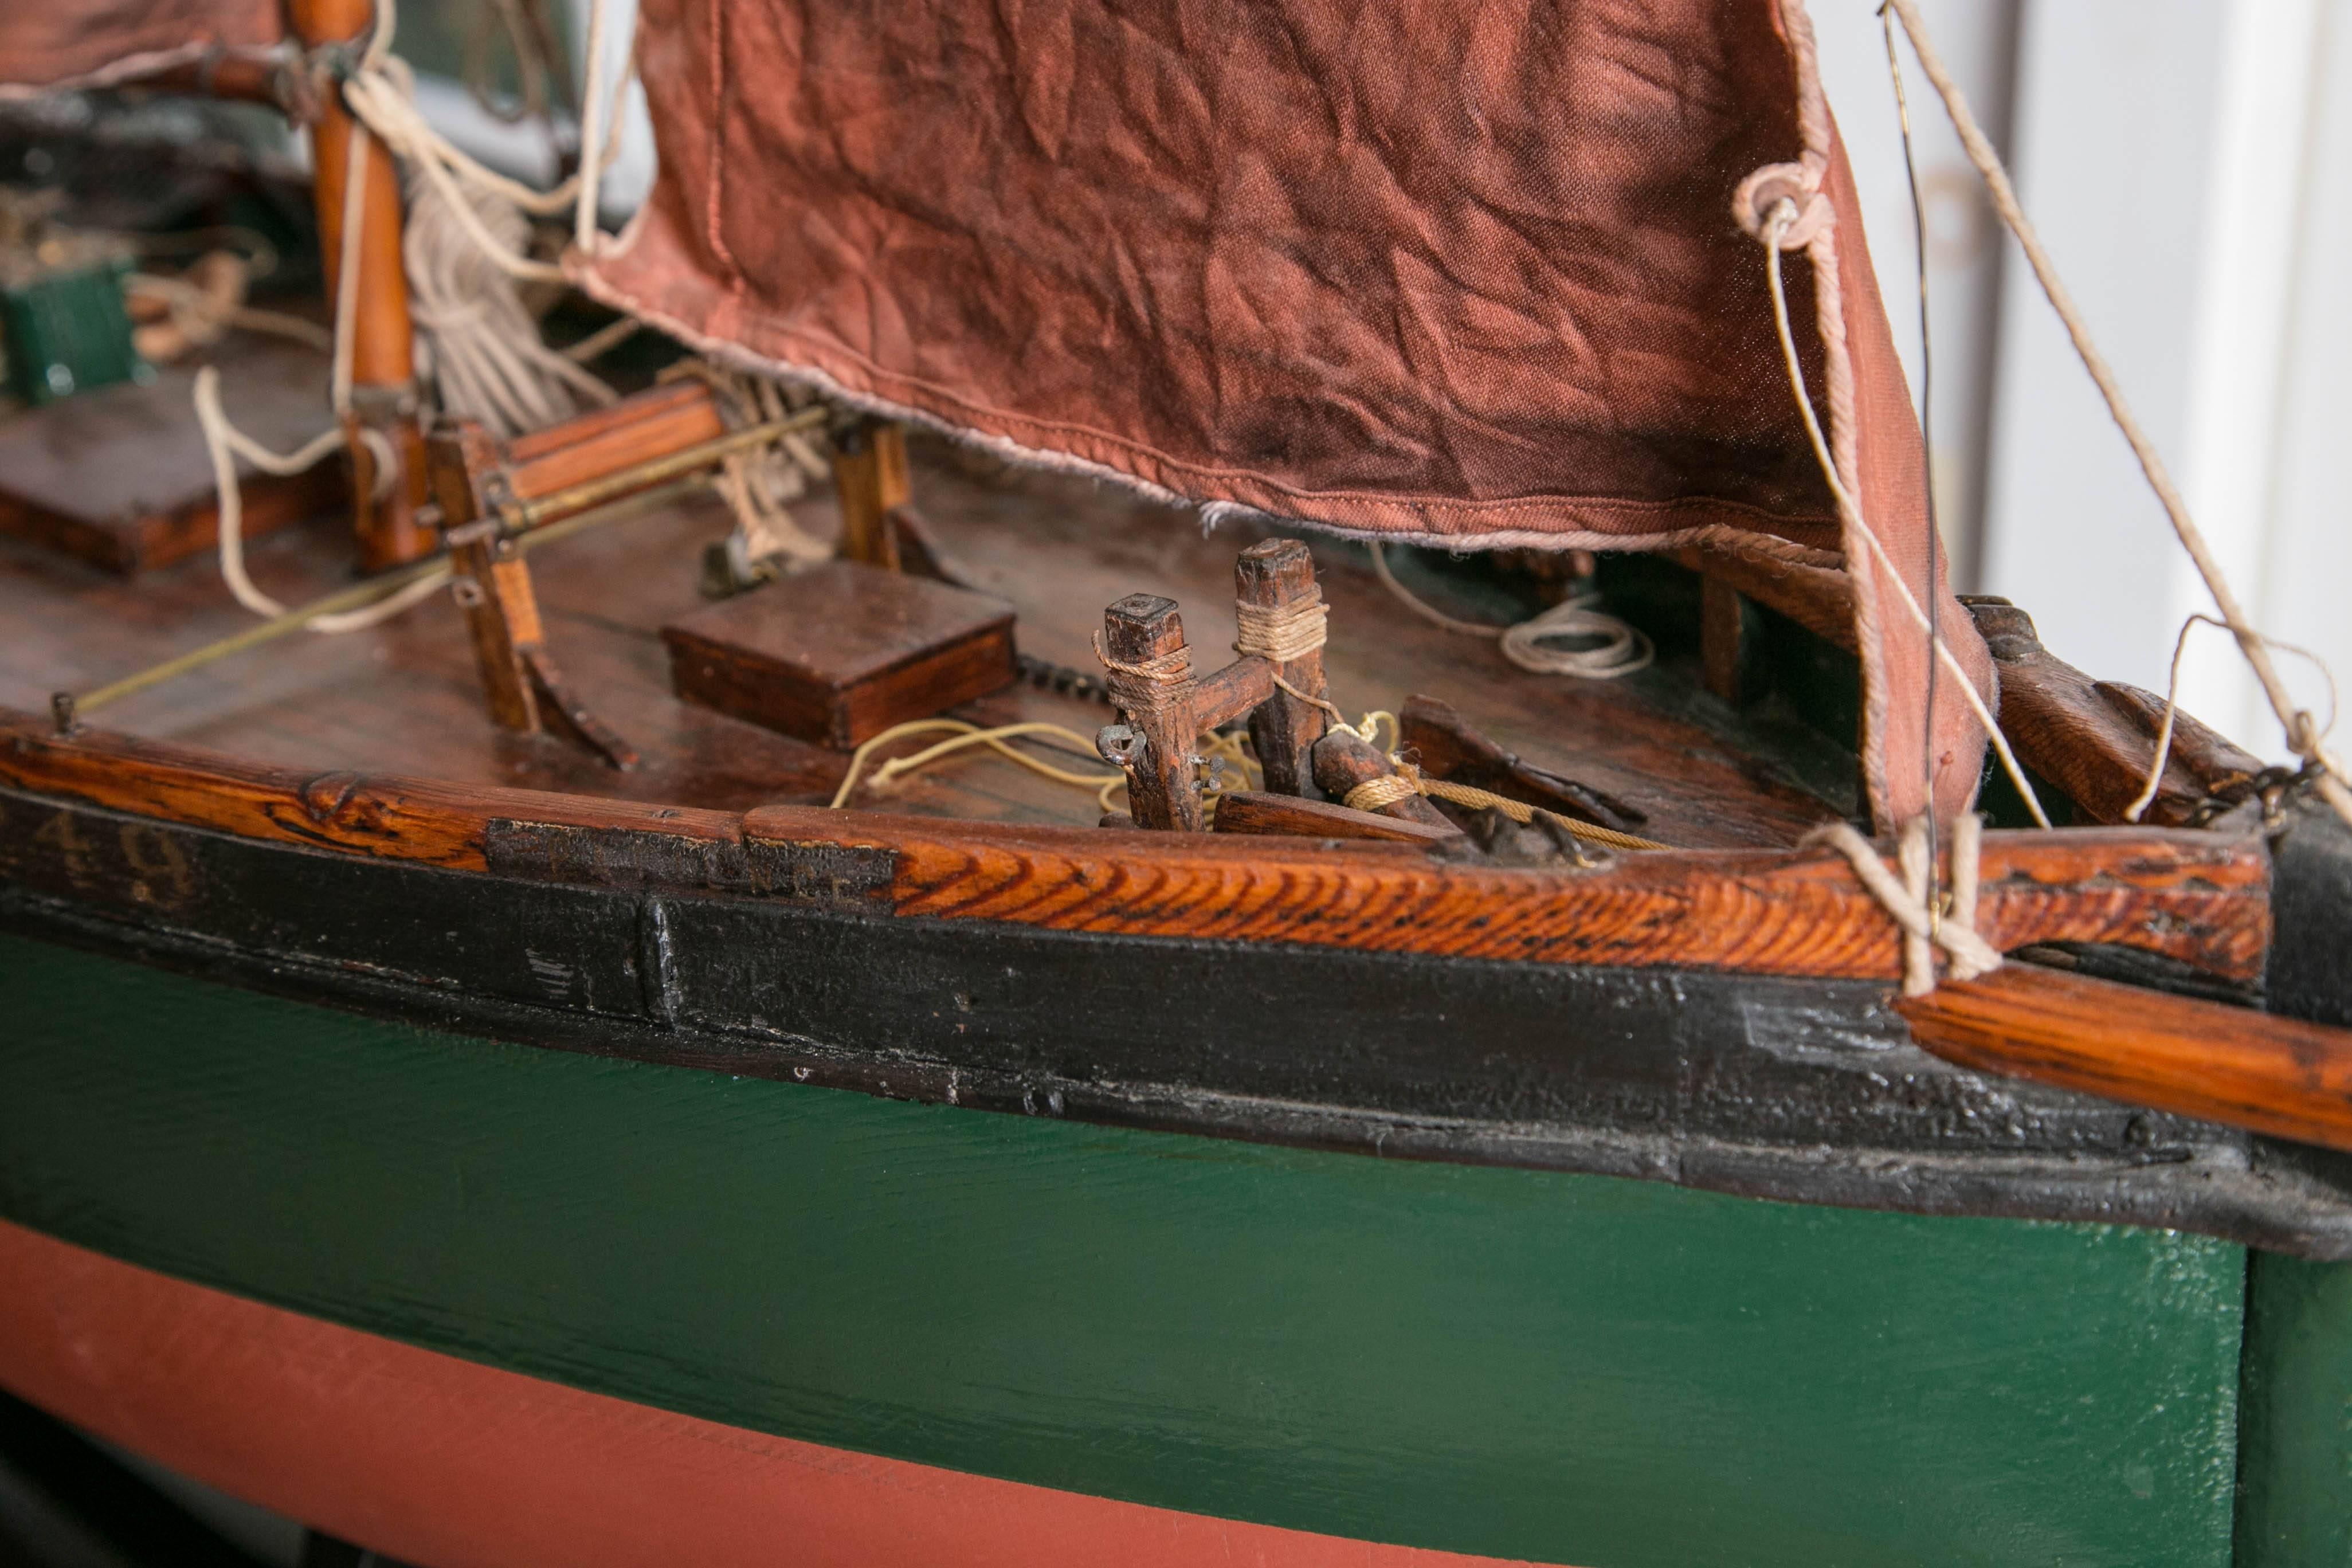 Fully fitted with proper sails (colored the tint that they would have been after their first proofing coat), chains and anchor, it proudly displays its workman roots. Employed through much of the 19th century along the coasts, these boats even found